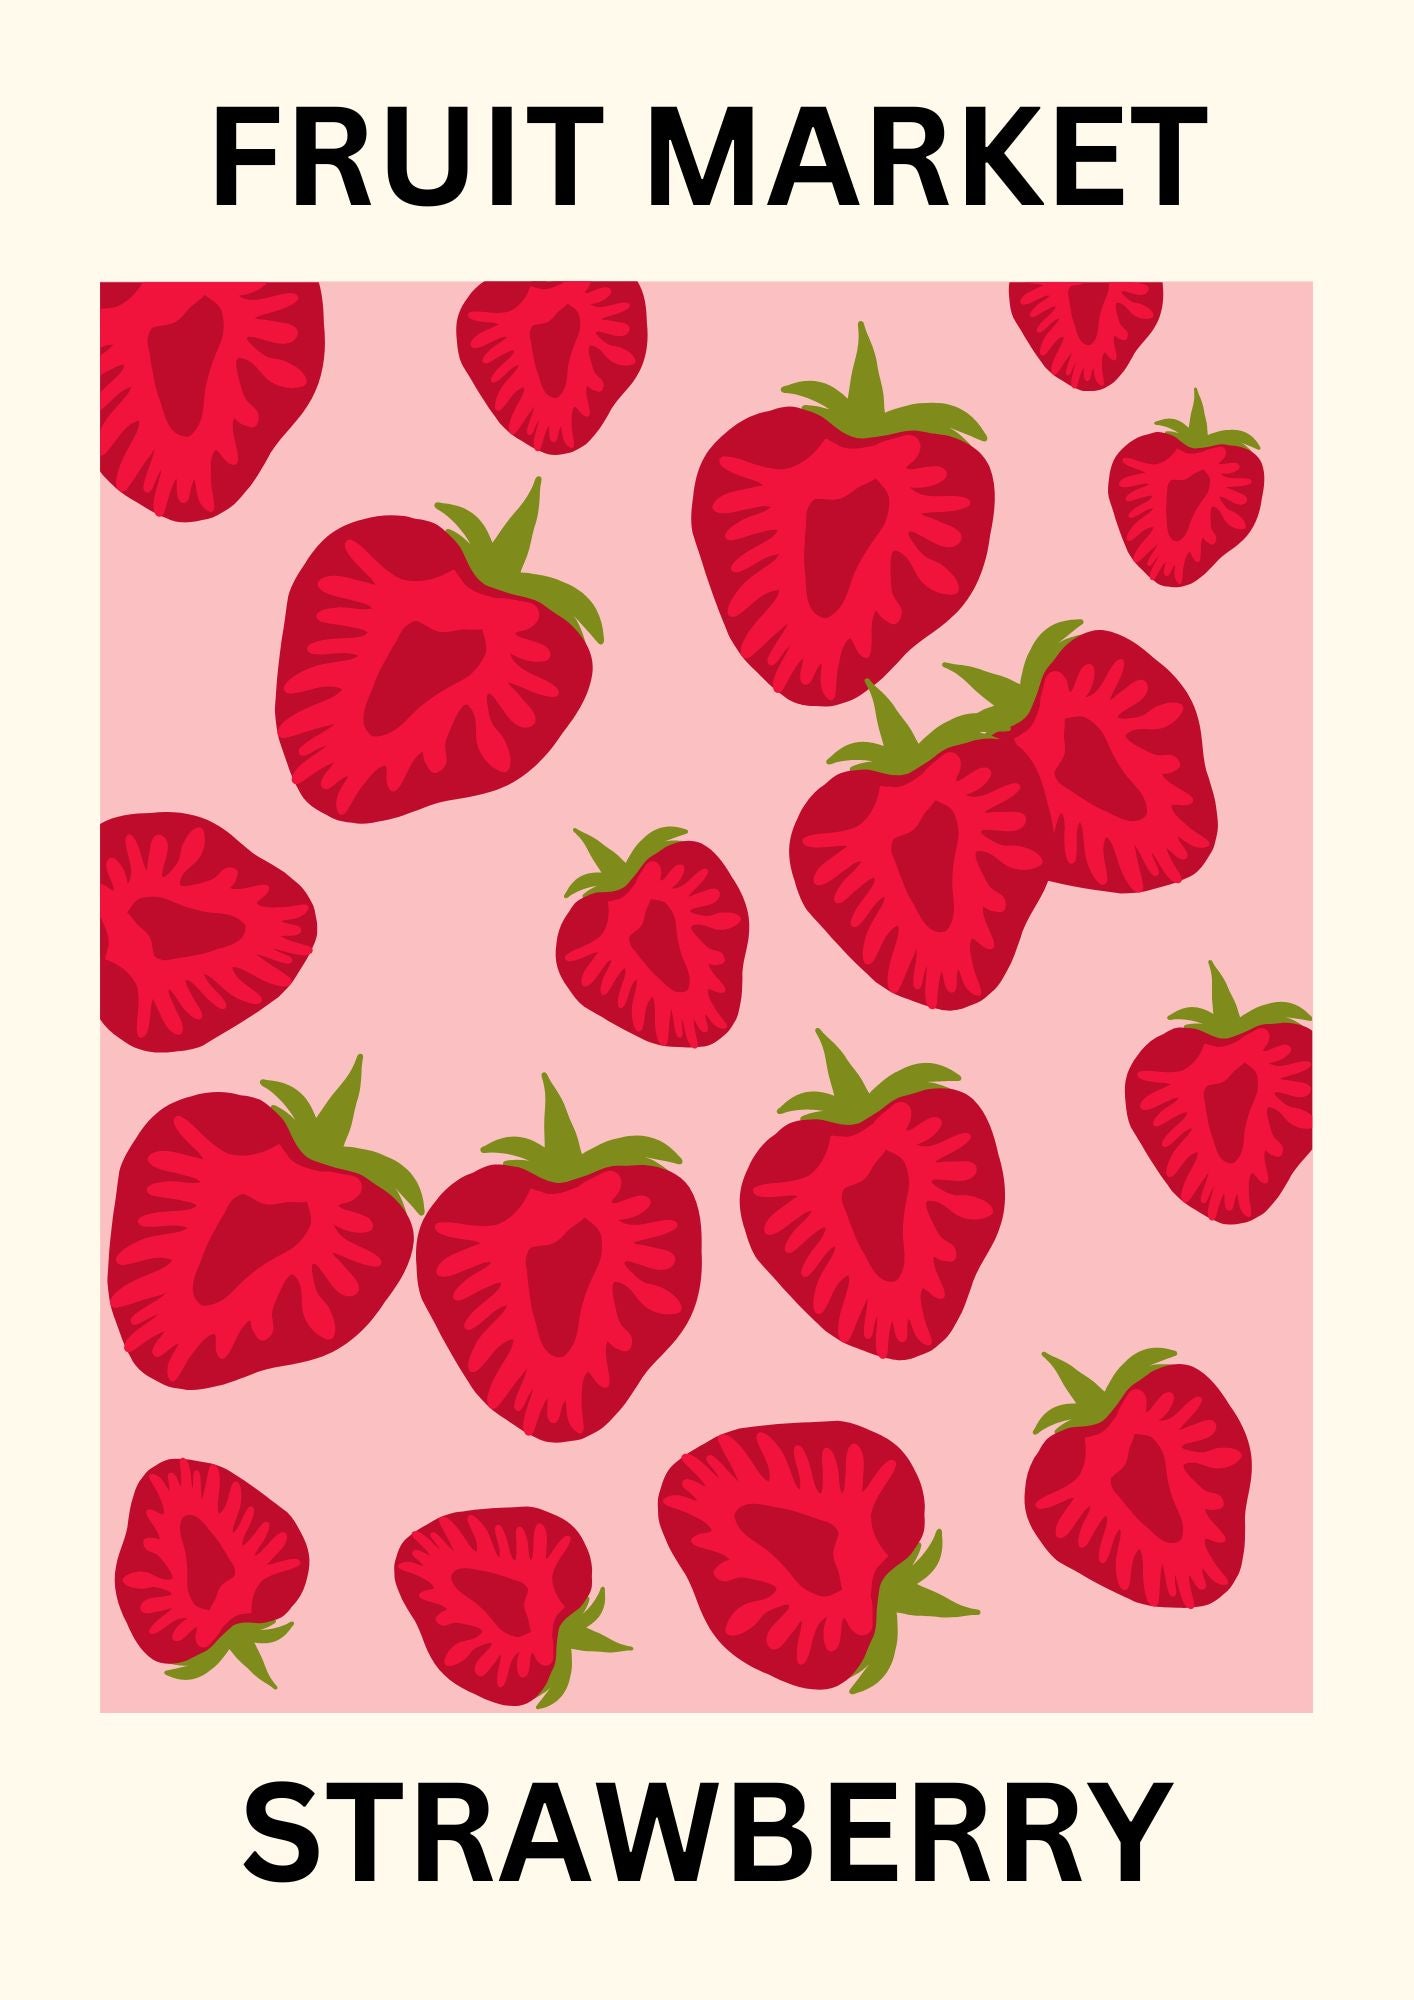 Fruit market strawberry poster yellow poster